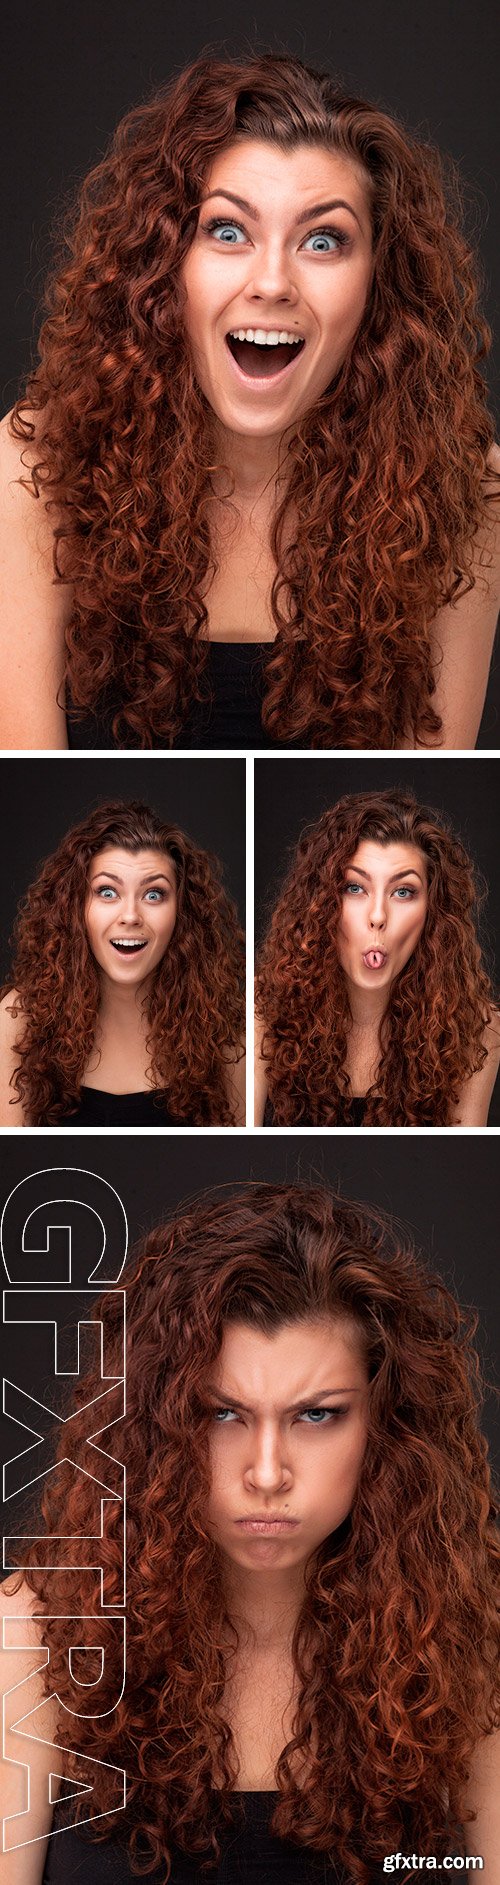 Stock Photos - Emotional portrait of woman with healthy brown curly hair isolated over dark grey background